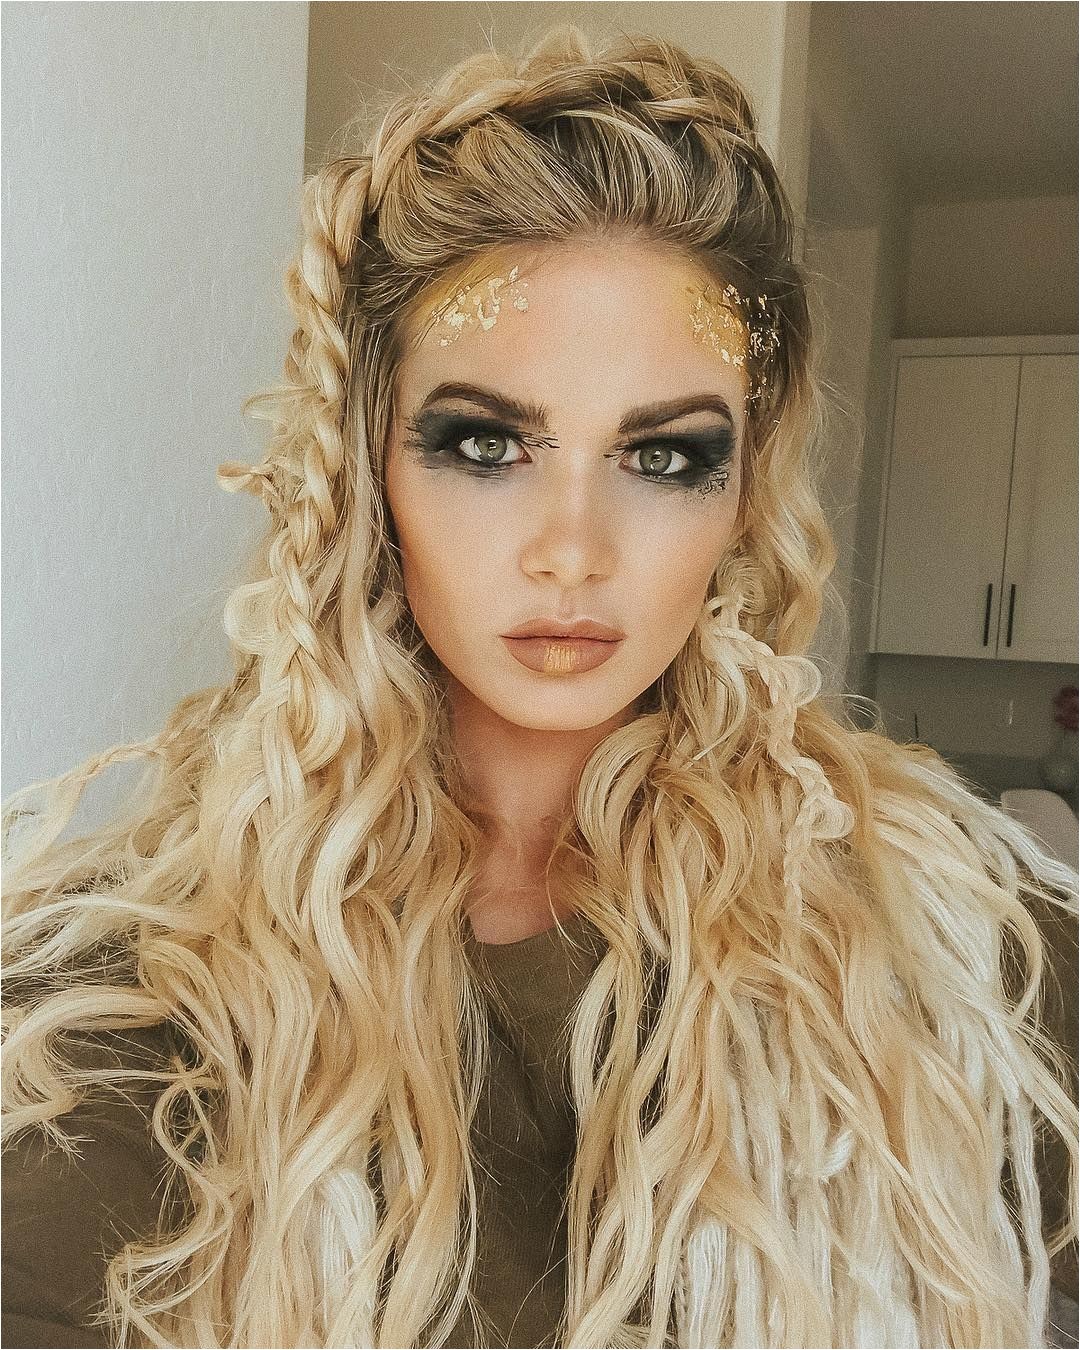 Viking Hairstyles for Women 1 3m Followers 373 Following 3 071 Posts See Instagram Photos